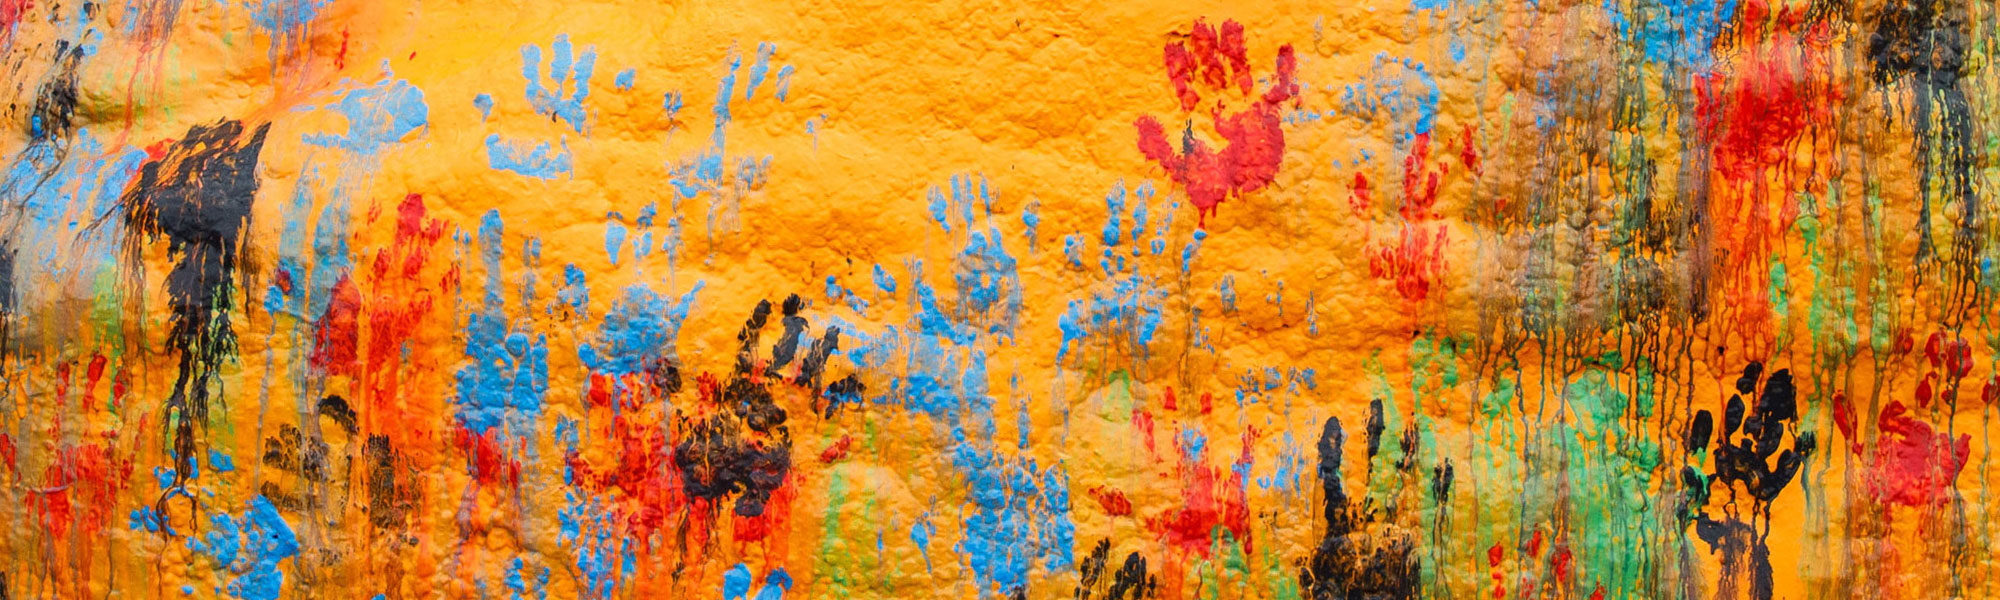 Multi-colored handprints on the Rock